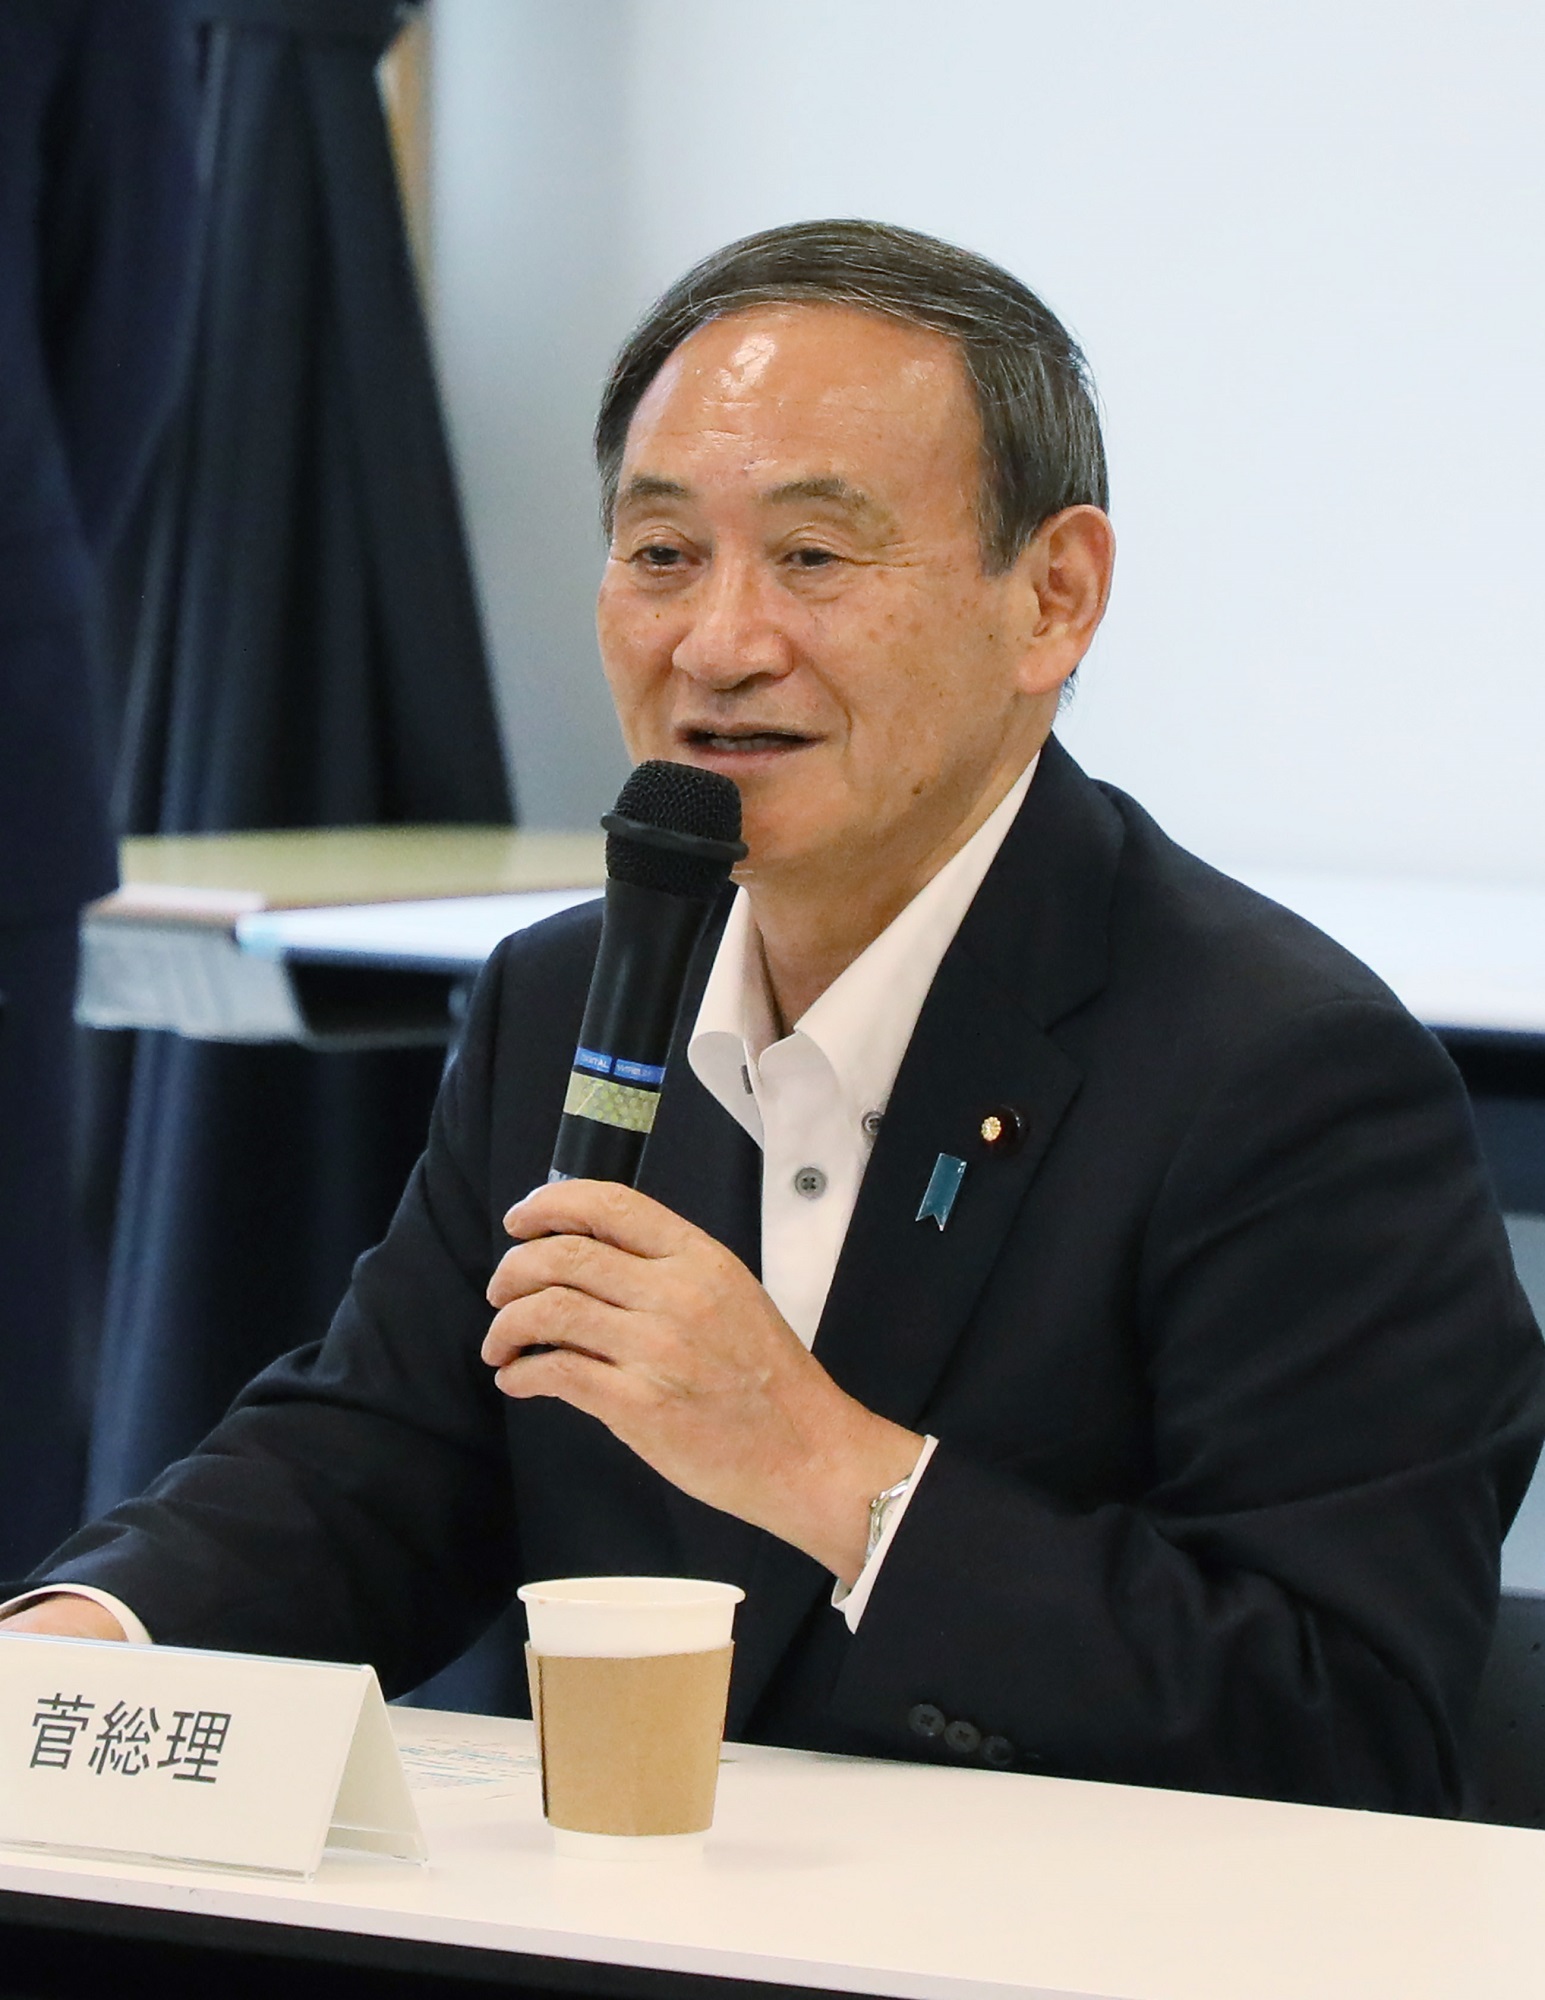 Photograph of the Prime Minister interacting with students at the Futaba Mirai Gakuen (6)